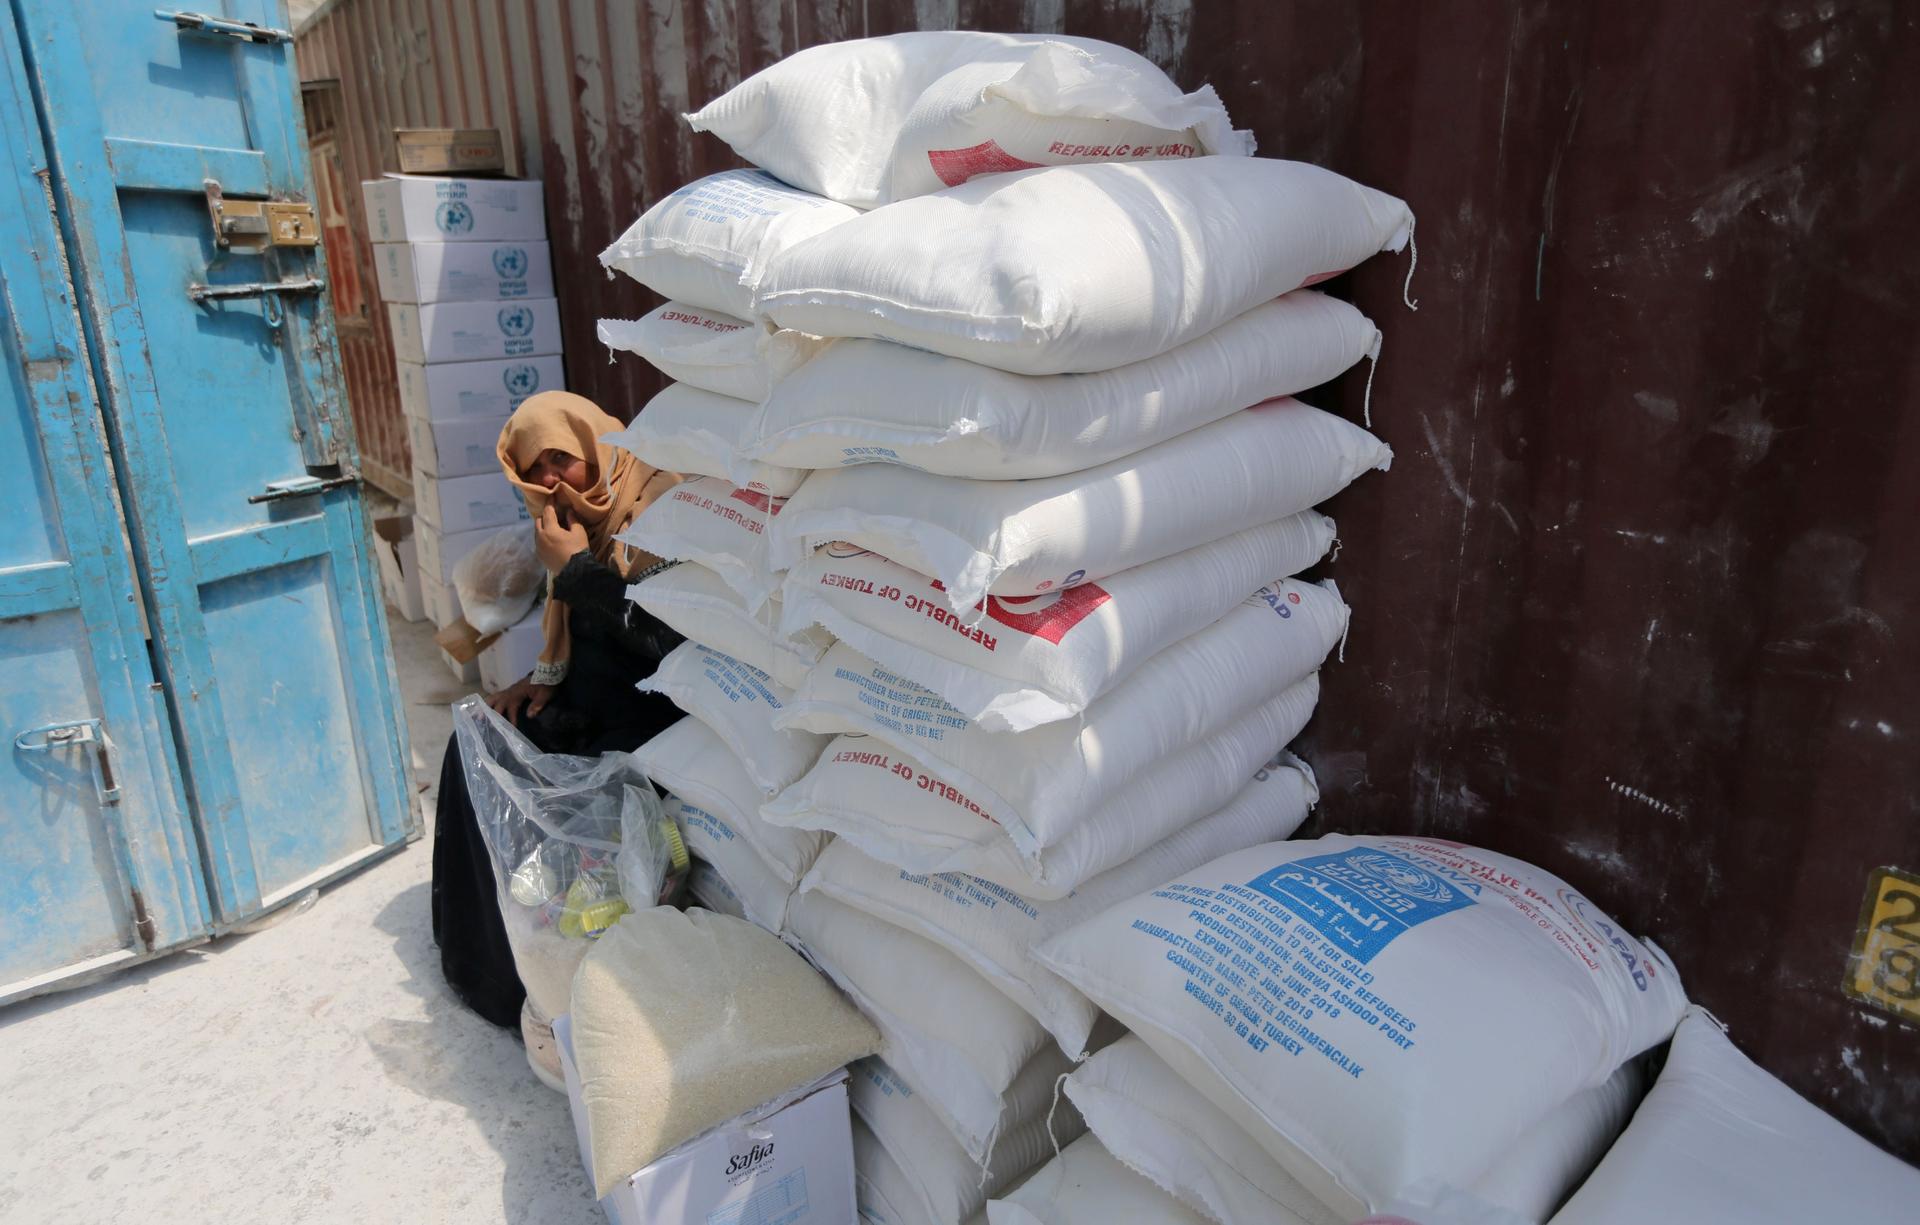 A Palestinian woman sits next to bags of flour